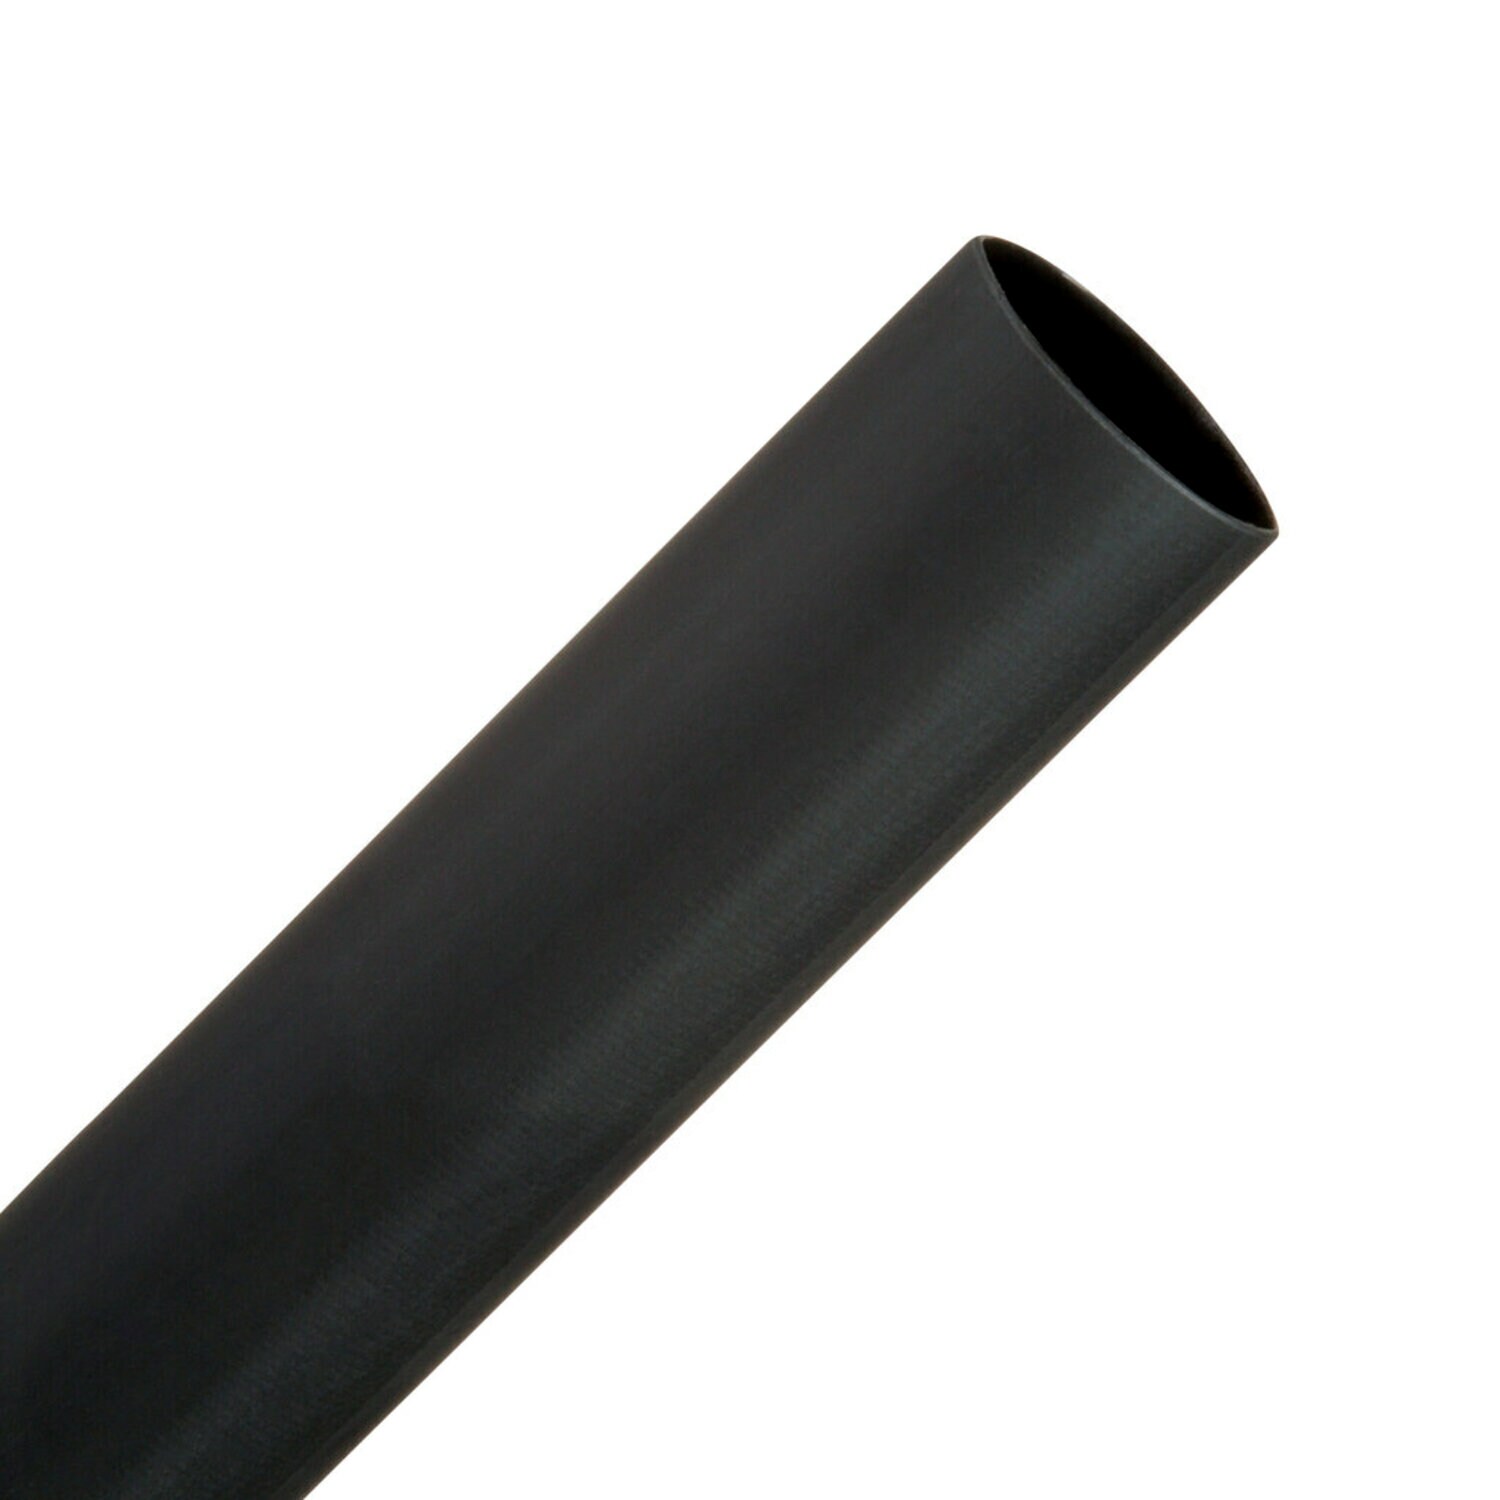 7100036089 - 3M Thin-Wall Heat Shrink Tubing EPS-300, Adhesive-Lined, 1-6"-Black, 6
in length pieces, 10 pieces/pack, 10 packs/case